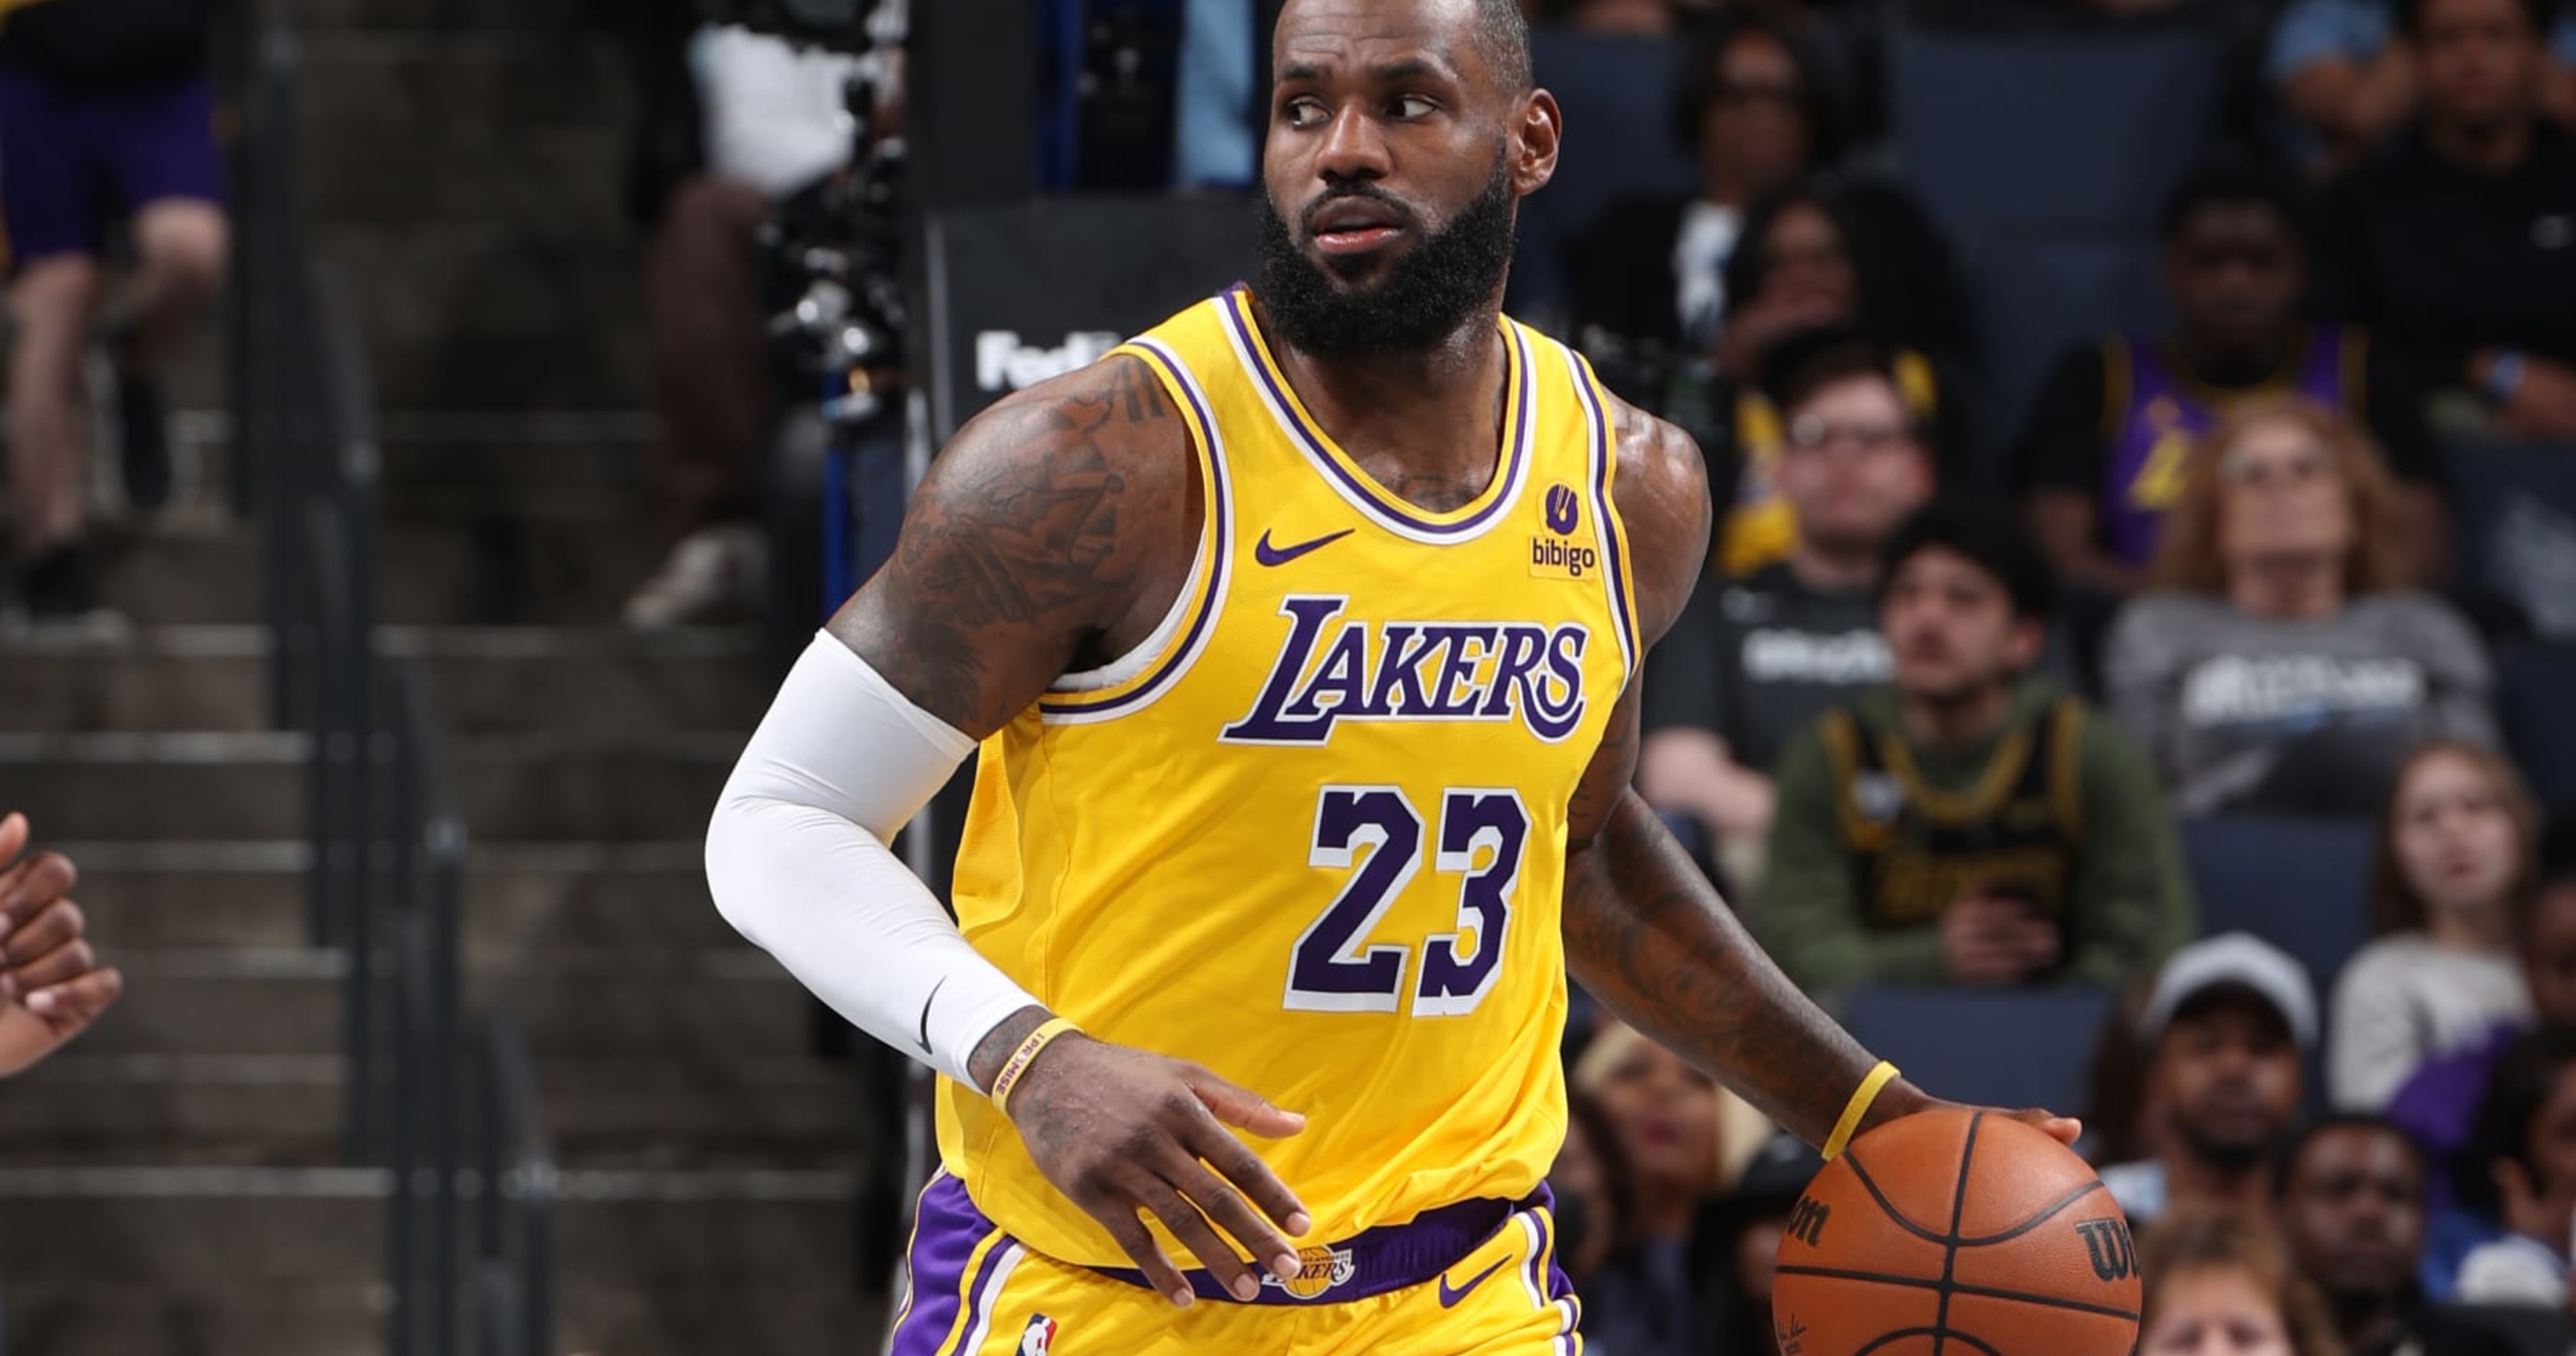 Lakers' LeBron James to Be 'Very Strategic' with Injury Despite NBA Playoff Standings